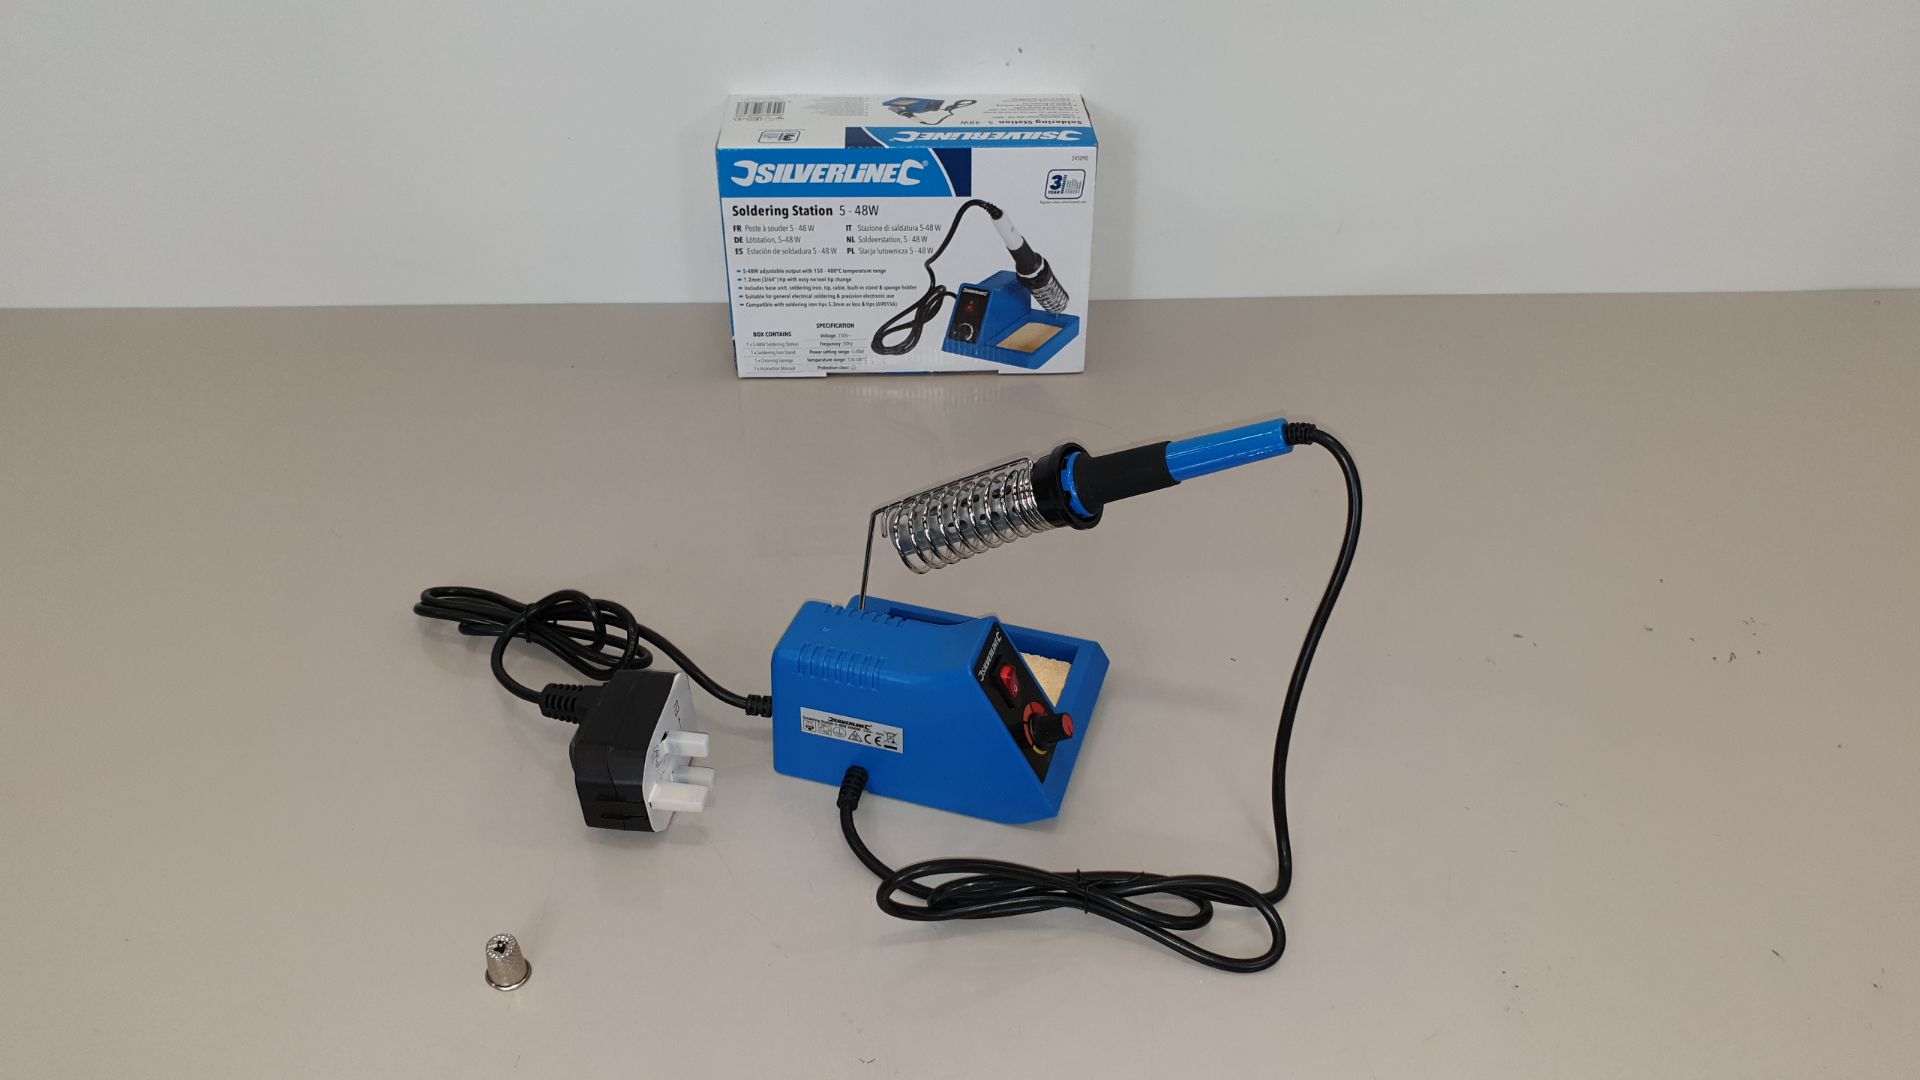 10 X BRAND NEW SILVERLINE SOLDERING STATIONS 5-48W (PROD CODE 245090) - RRP £31.34 EACH (EXC VAT) IN